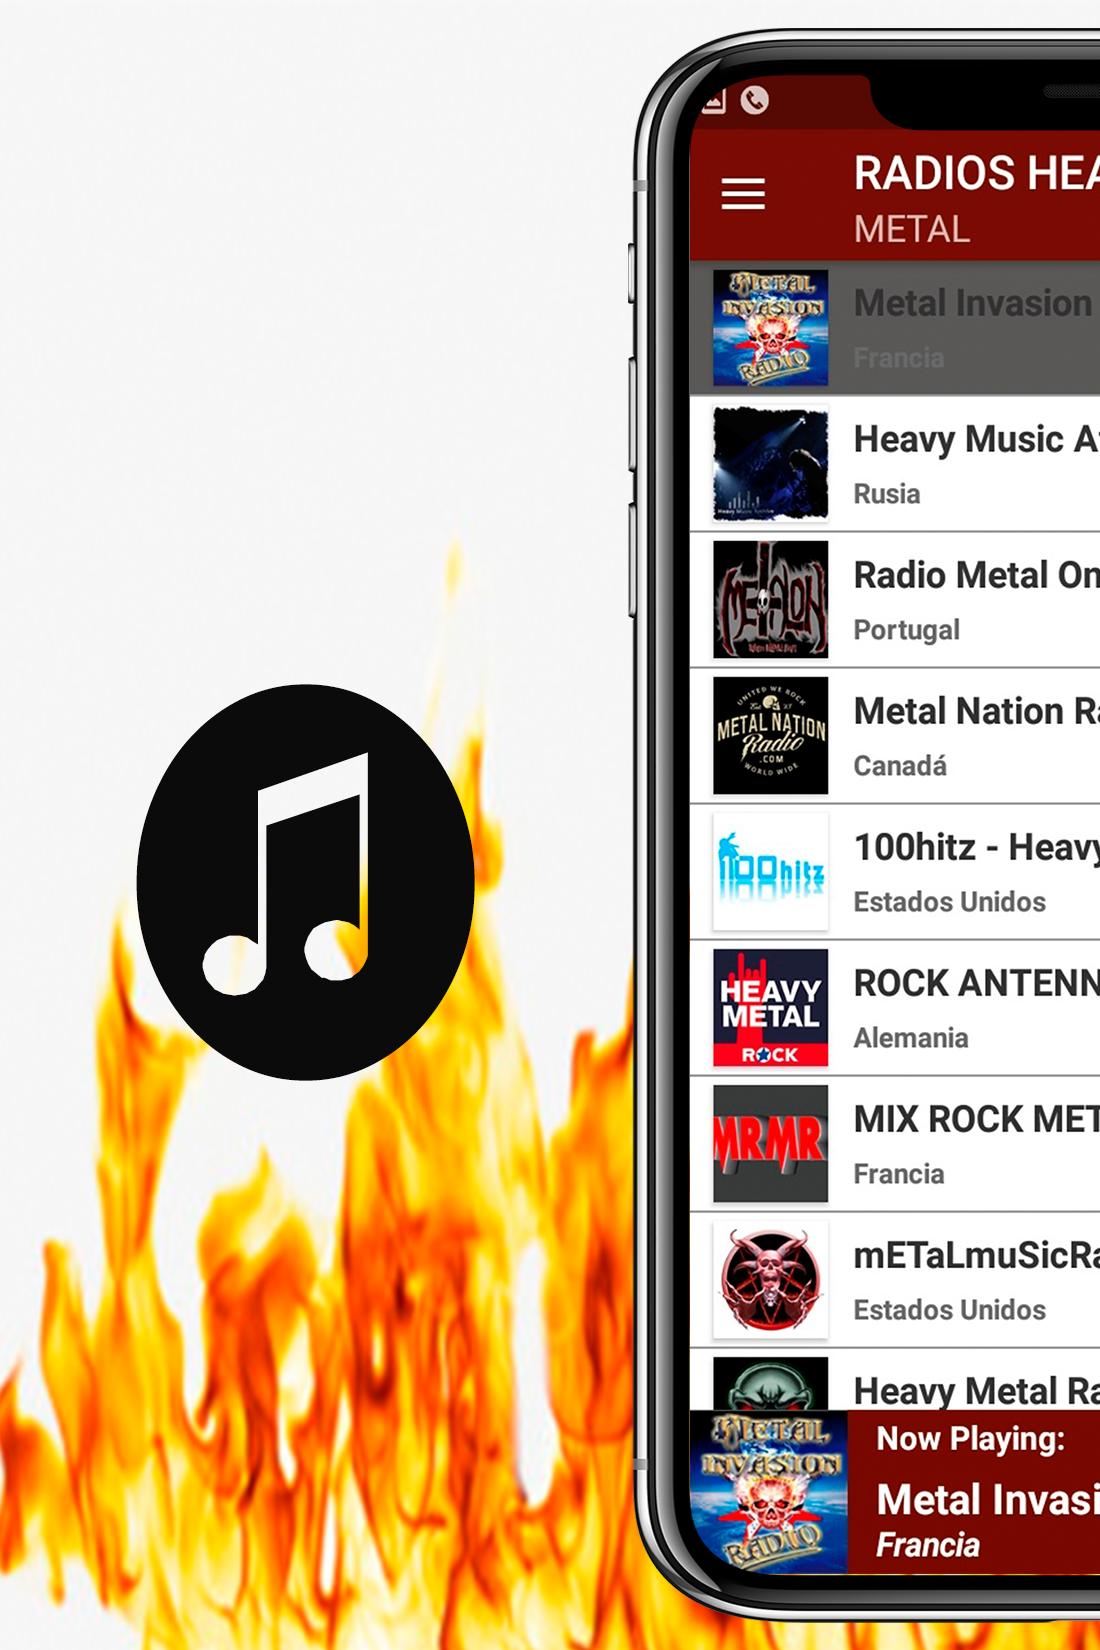 Free Heavy Metal Radio Offline Stations App APK for Android Download